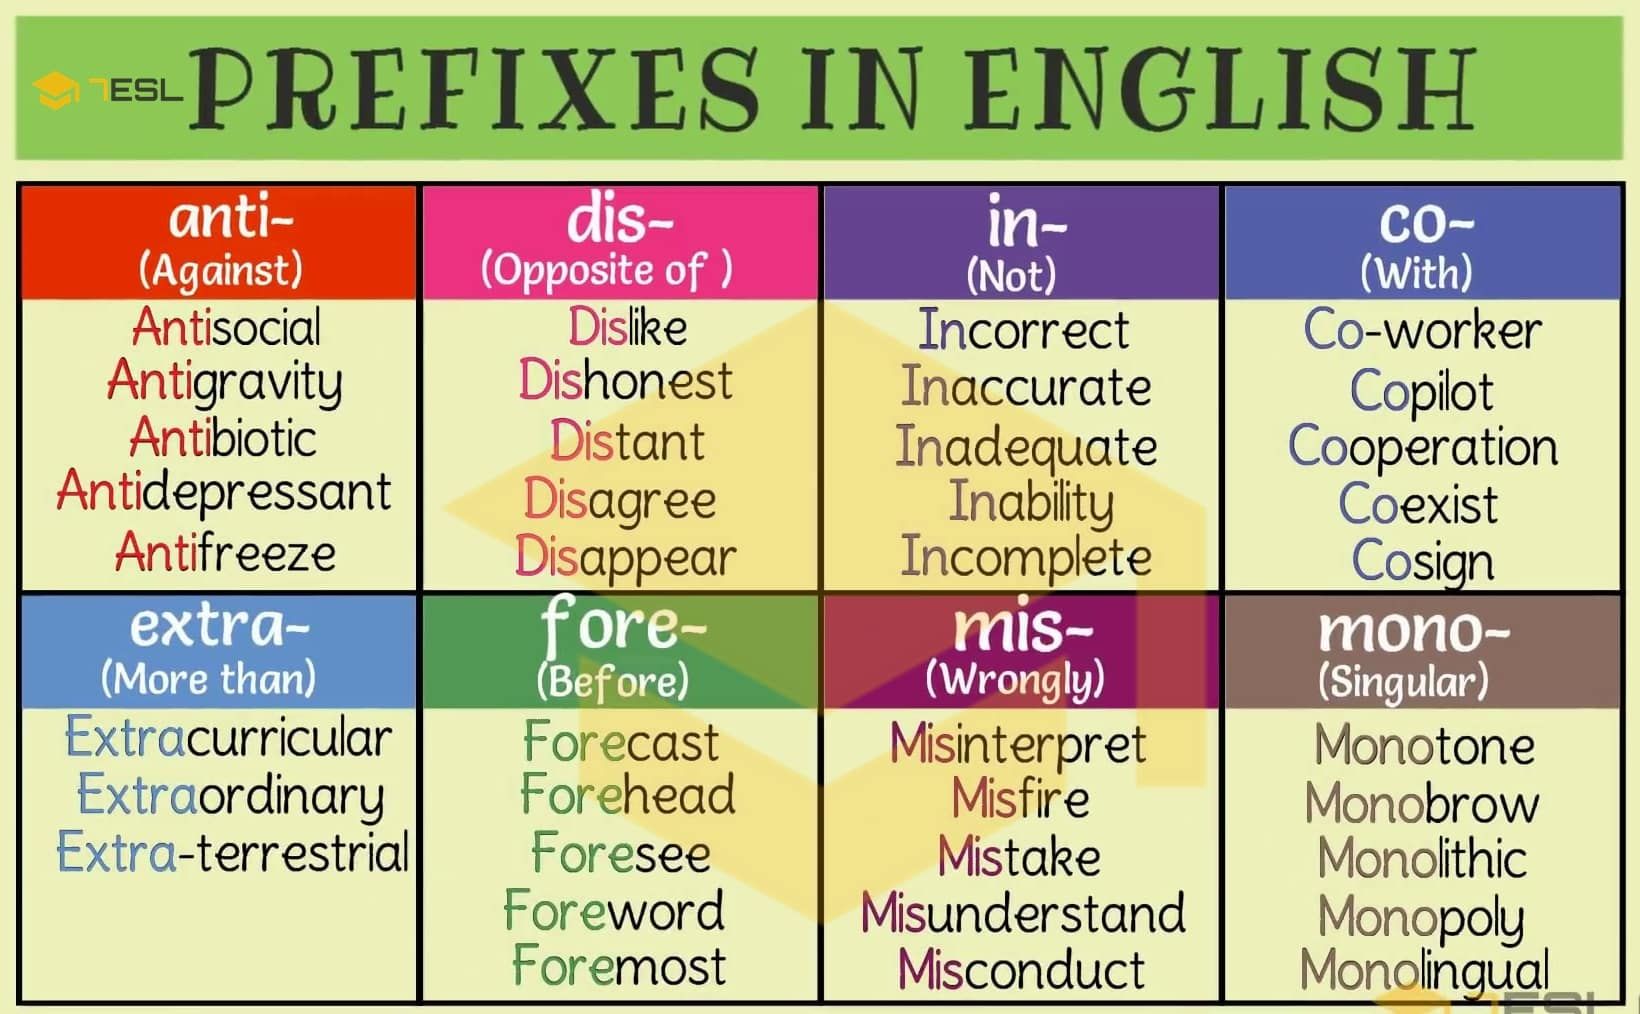 Suffixes and prefixes in English. Prefixes в английском языке. Приставки в английском языке таблица. Prefixes in English таблица.